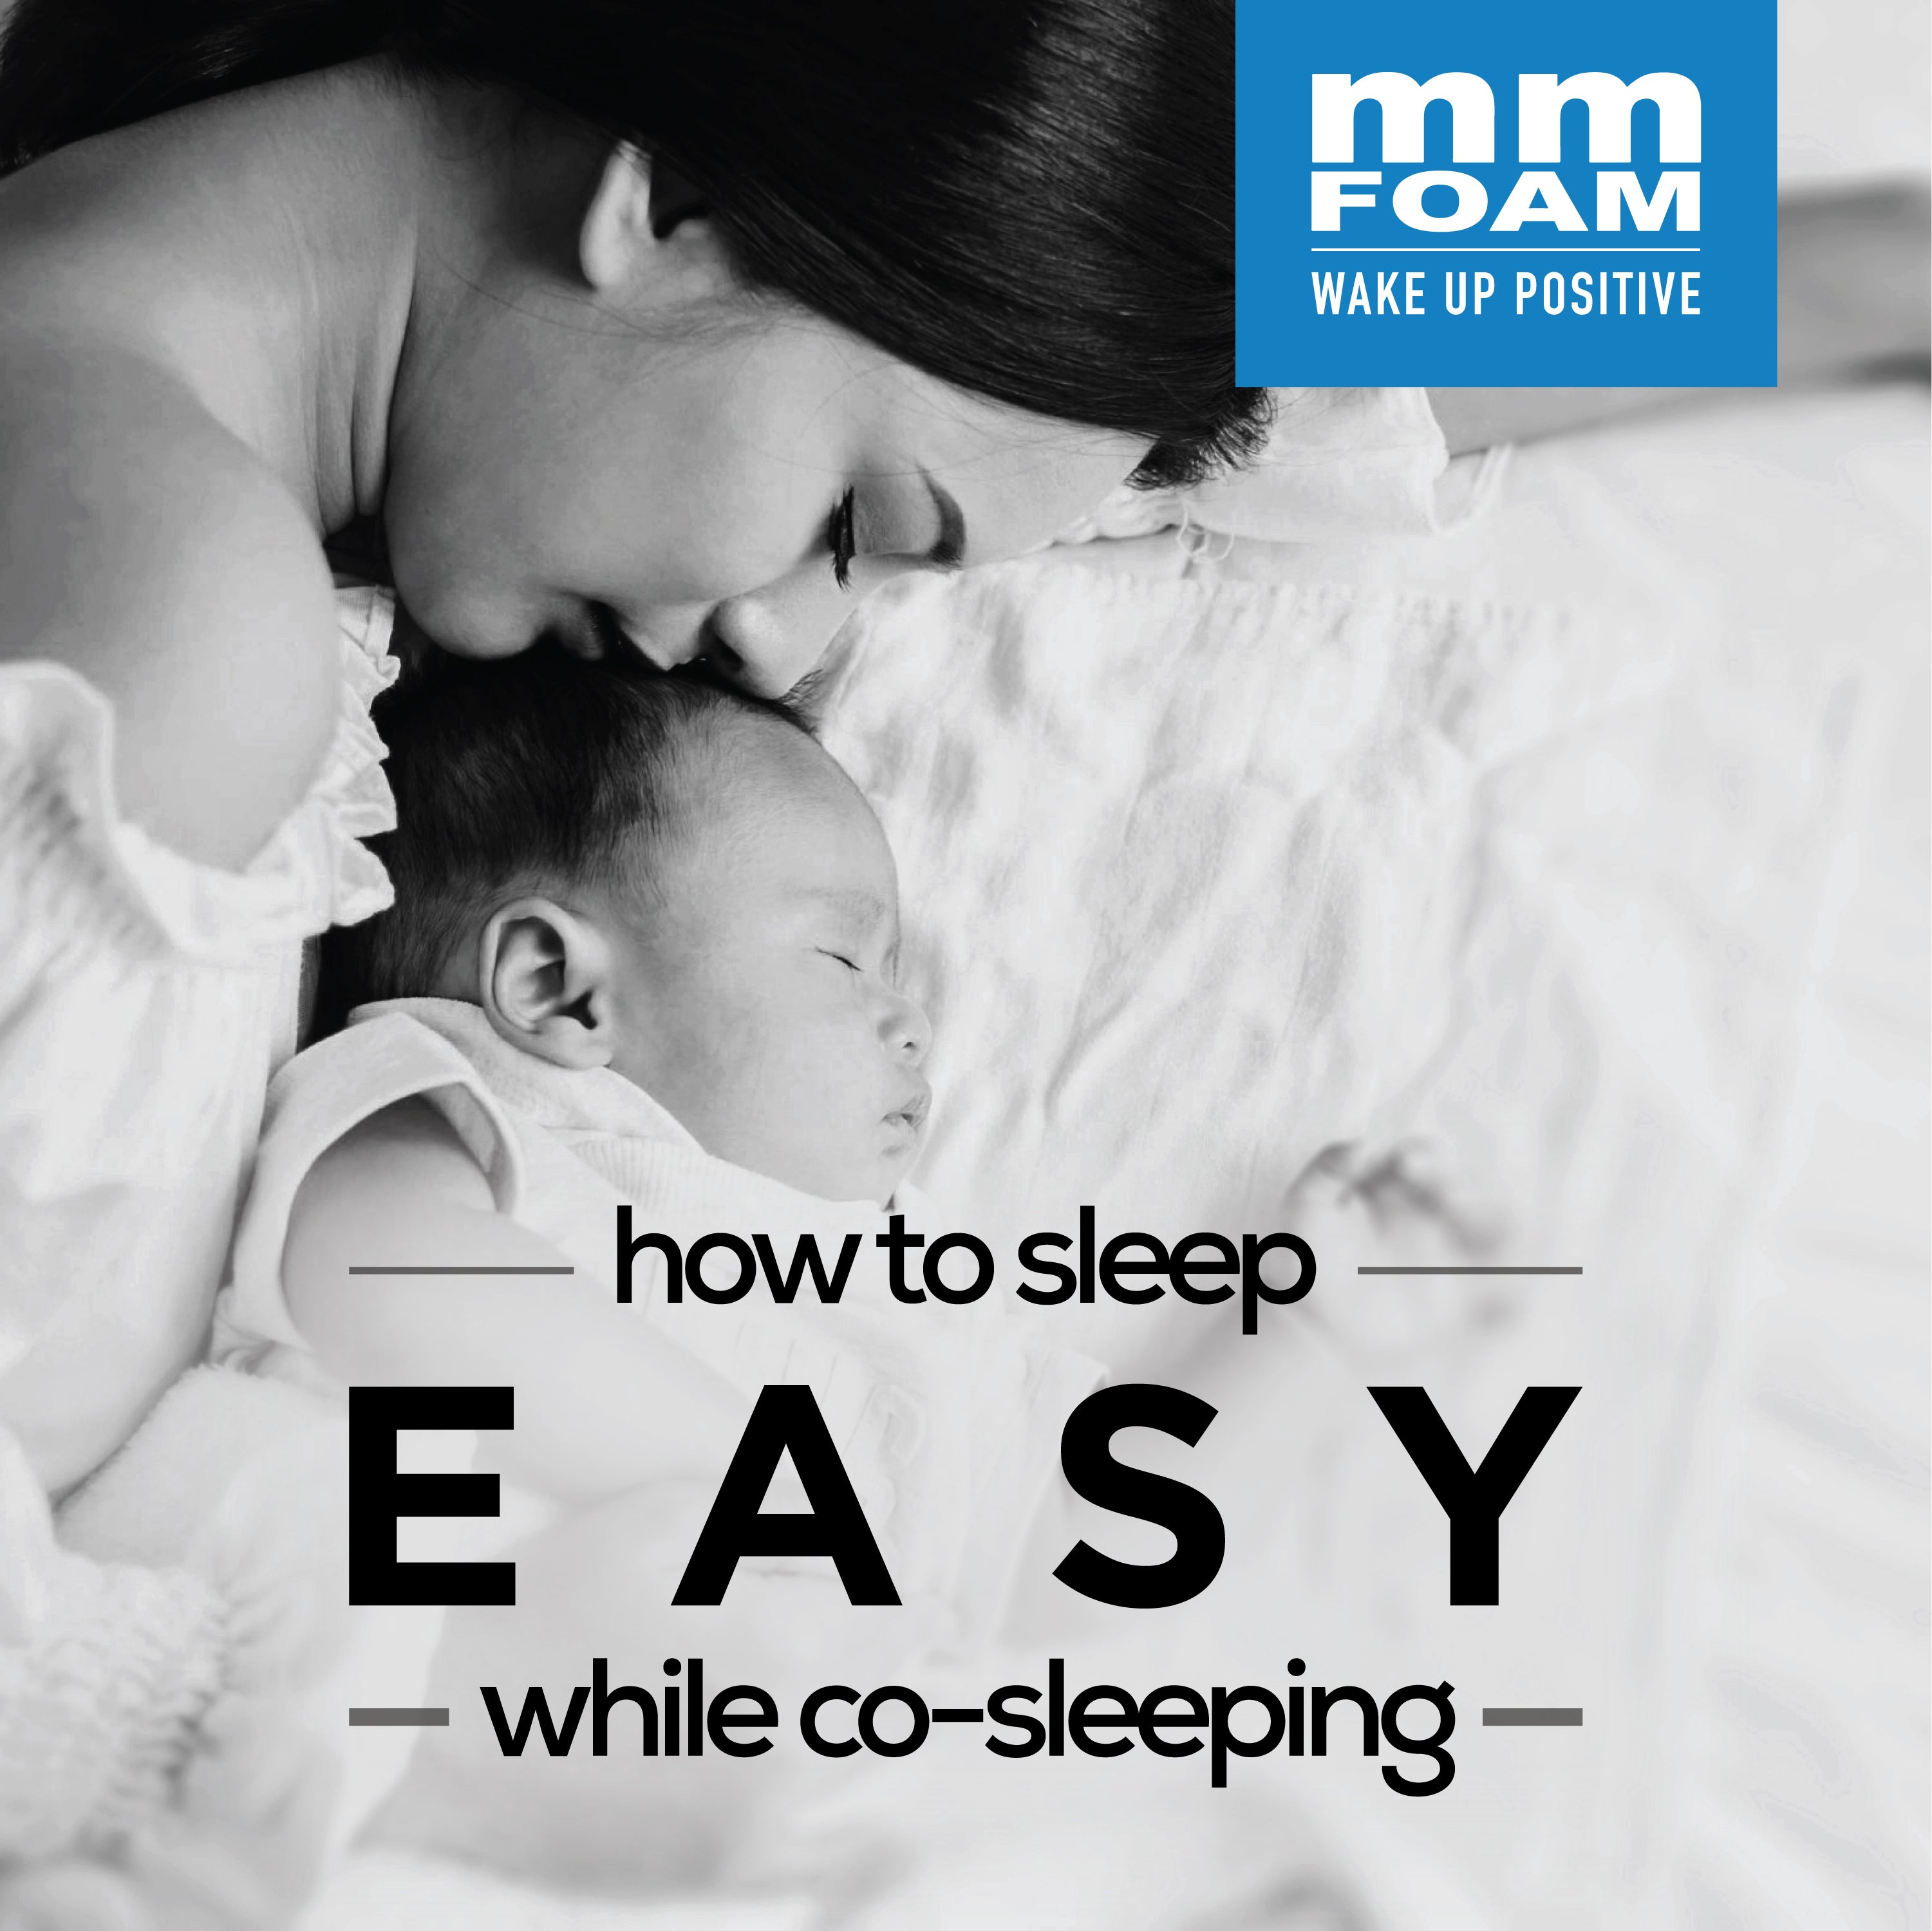 Sleep essentials if you are a co-sleeping new parent